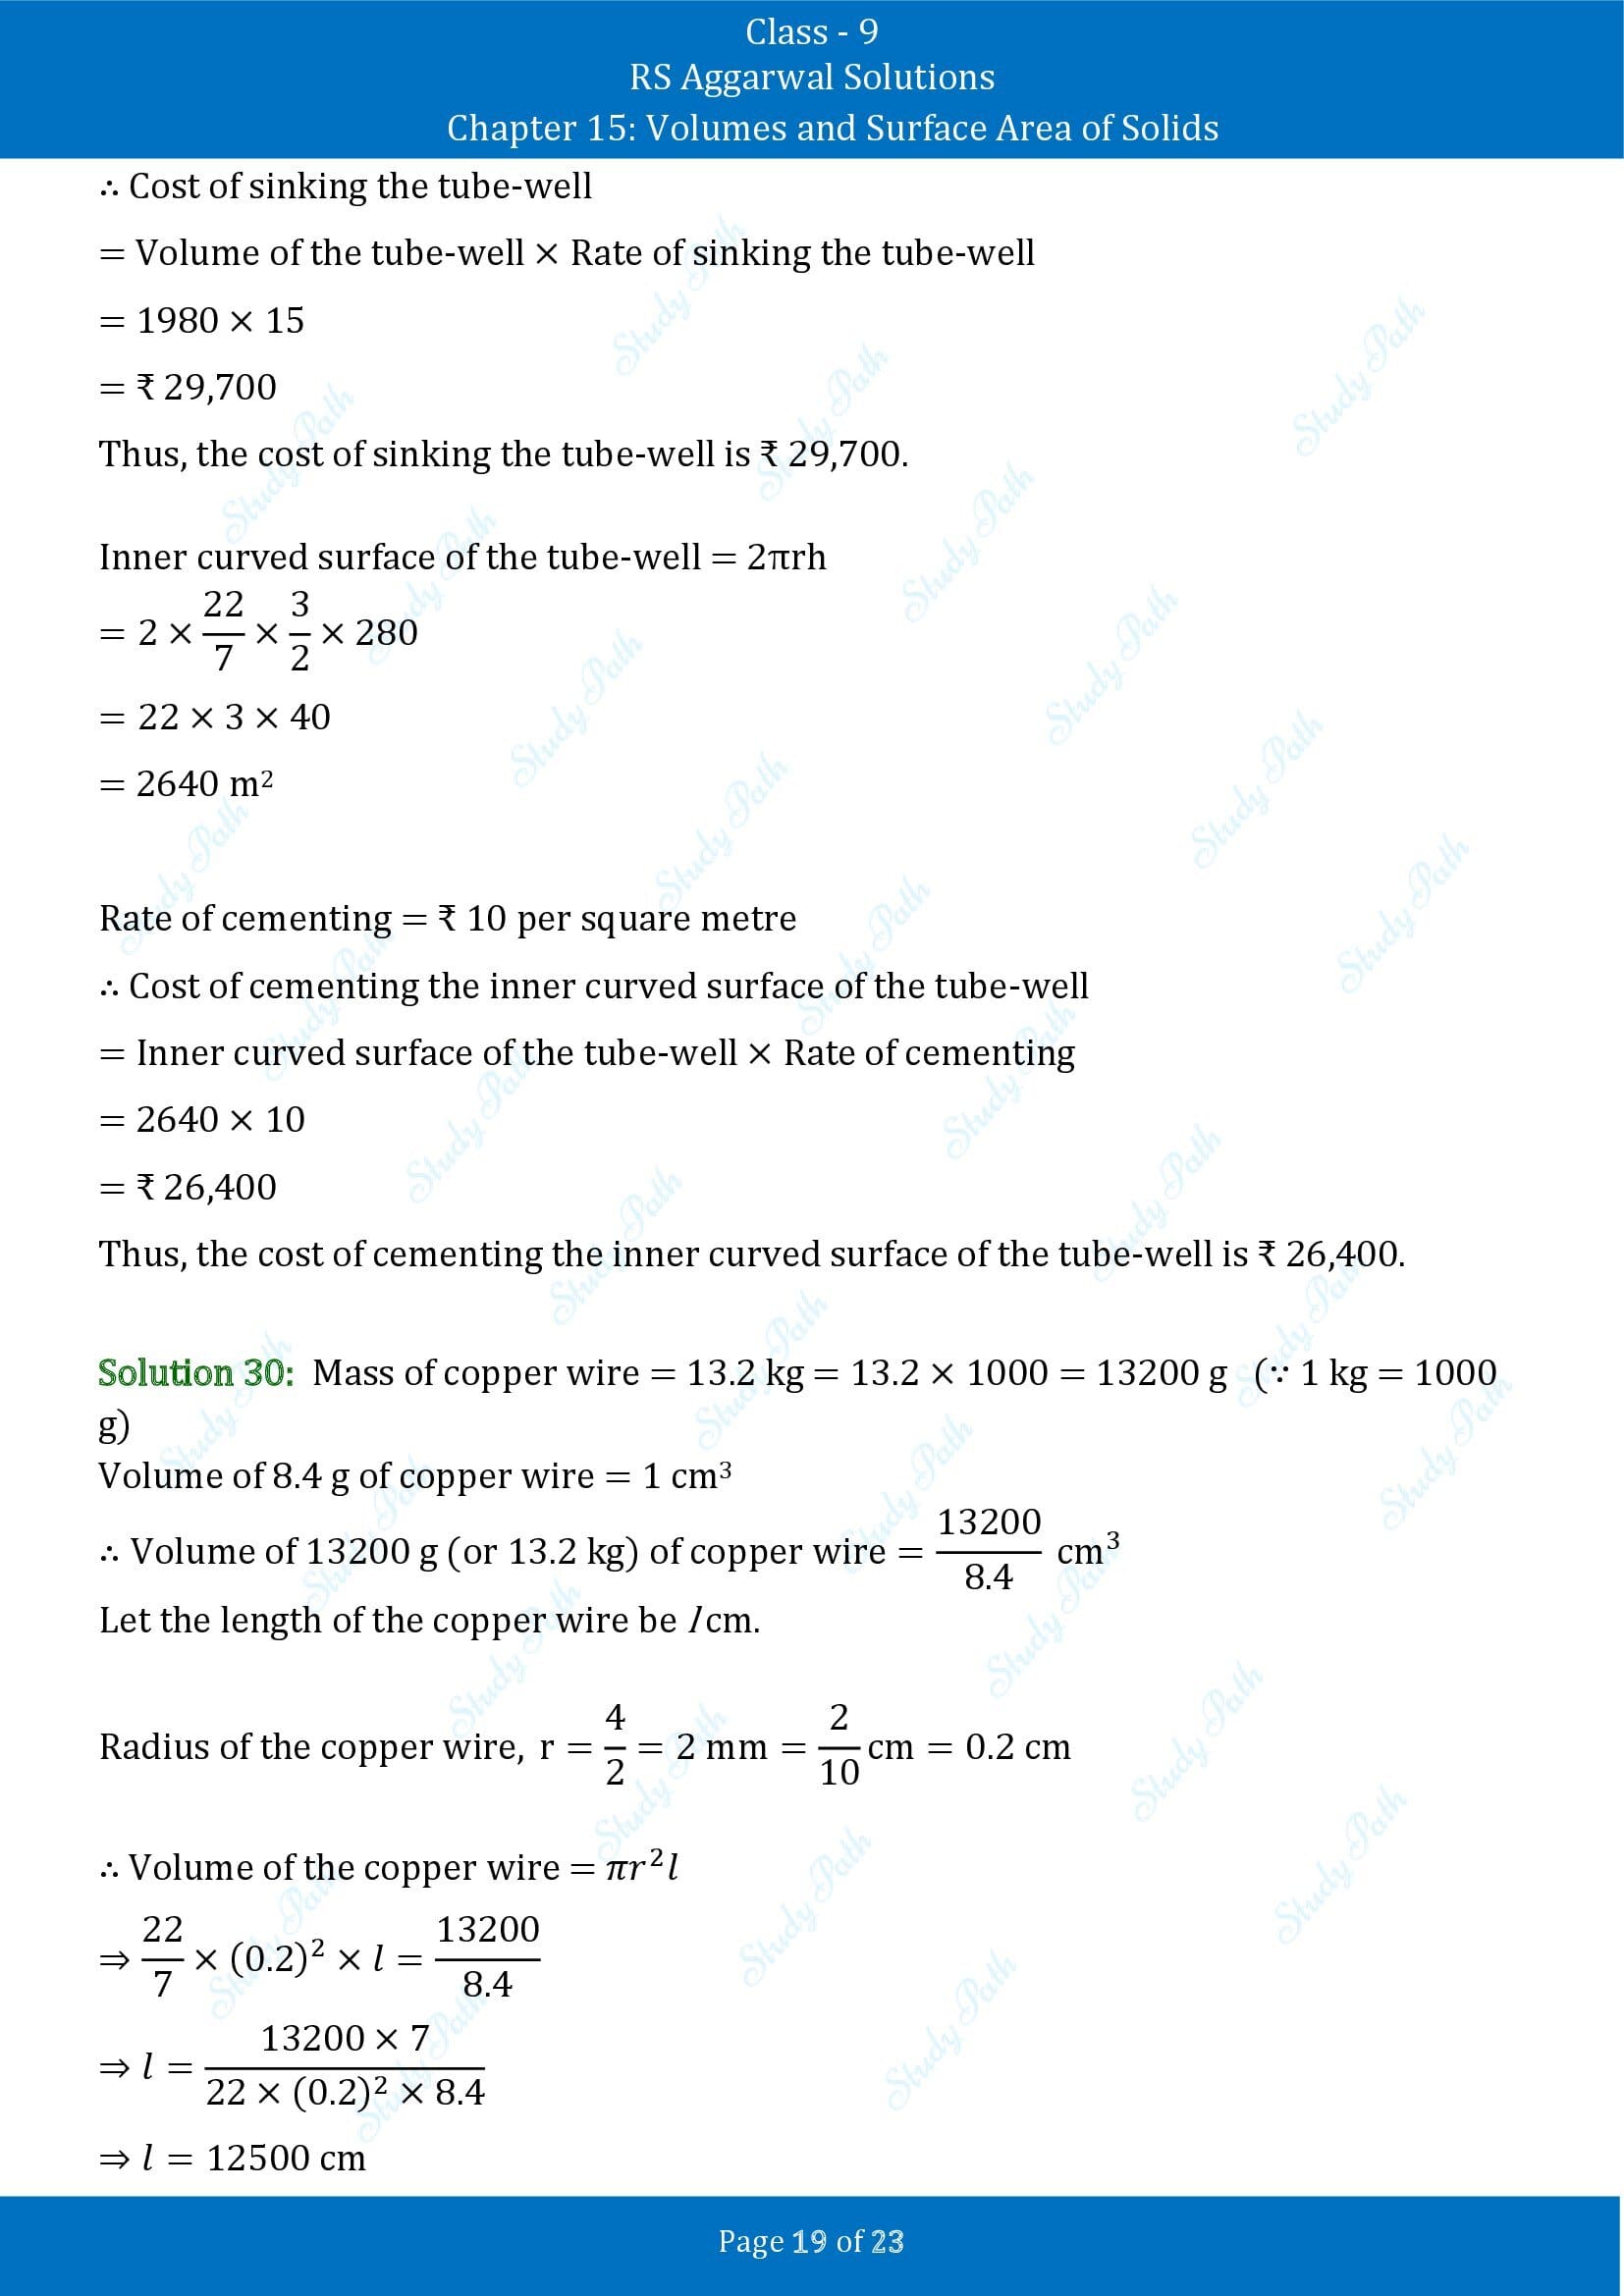 RS Aggarwal Solutions Class 9 Chapter 15 Volumes and Surface Area of Solids Exercise 15B 00019